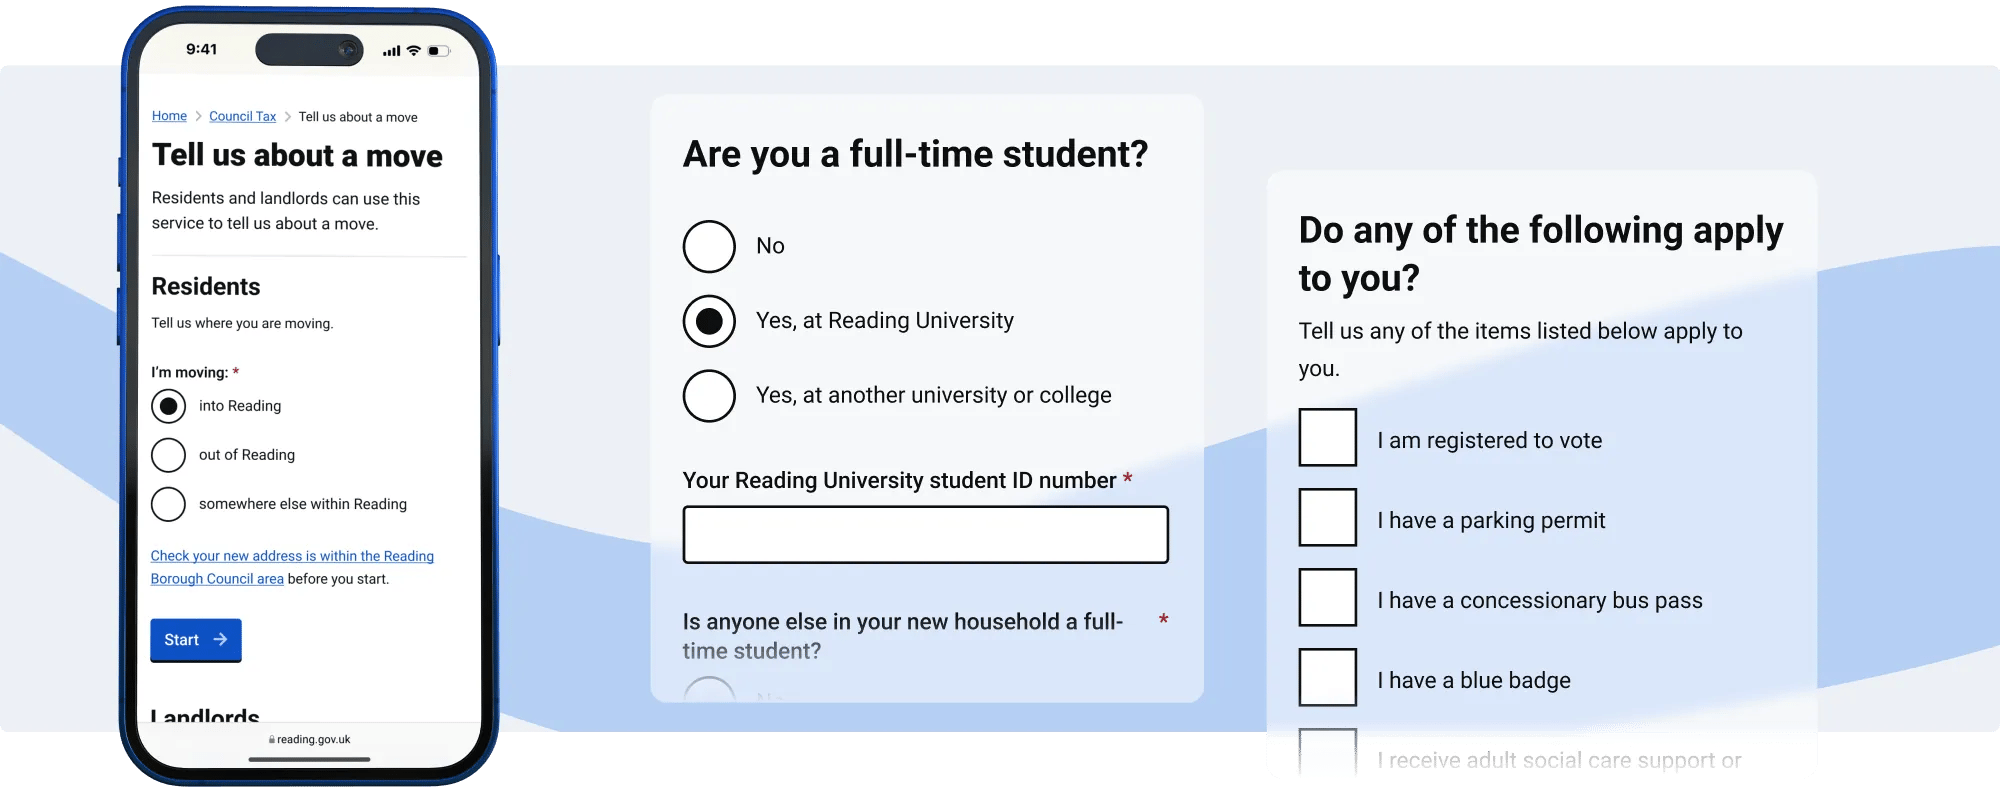 Mockup of the "tell us about a move" form on mobile